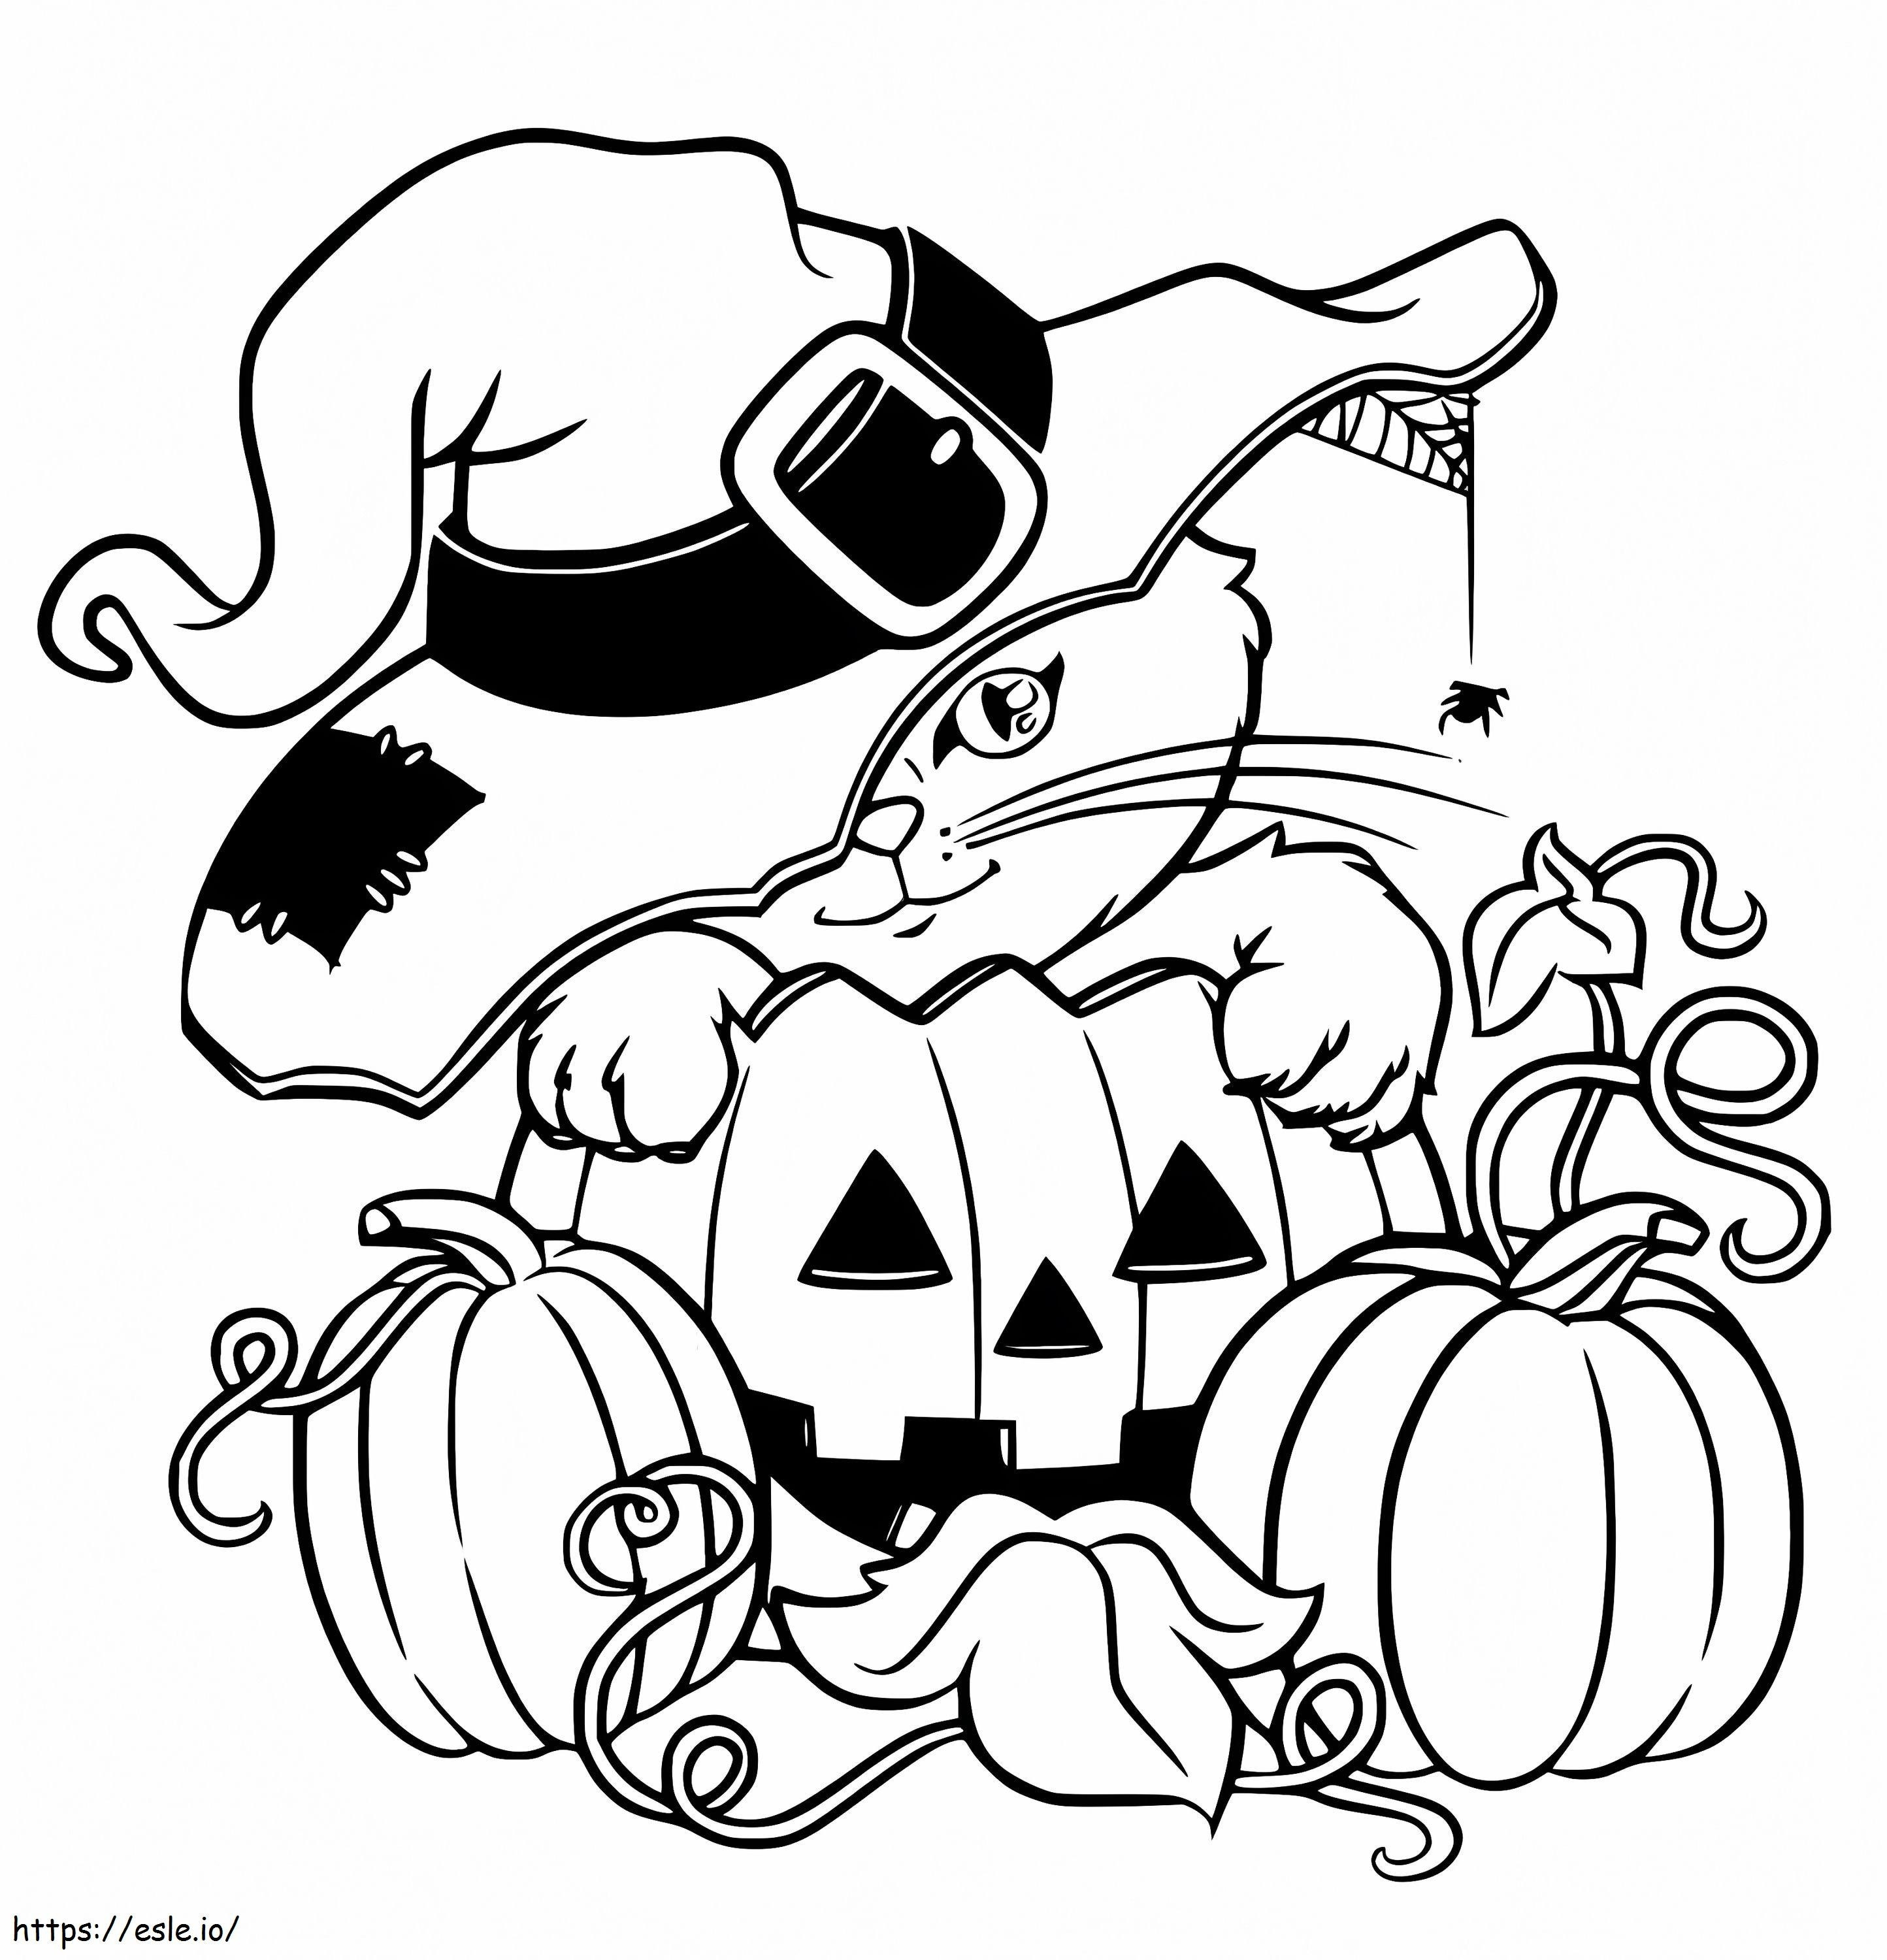 Black Cat And Pumpkins coloring page